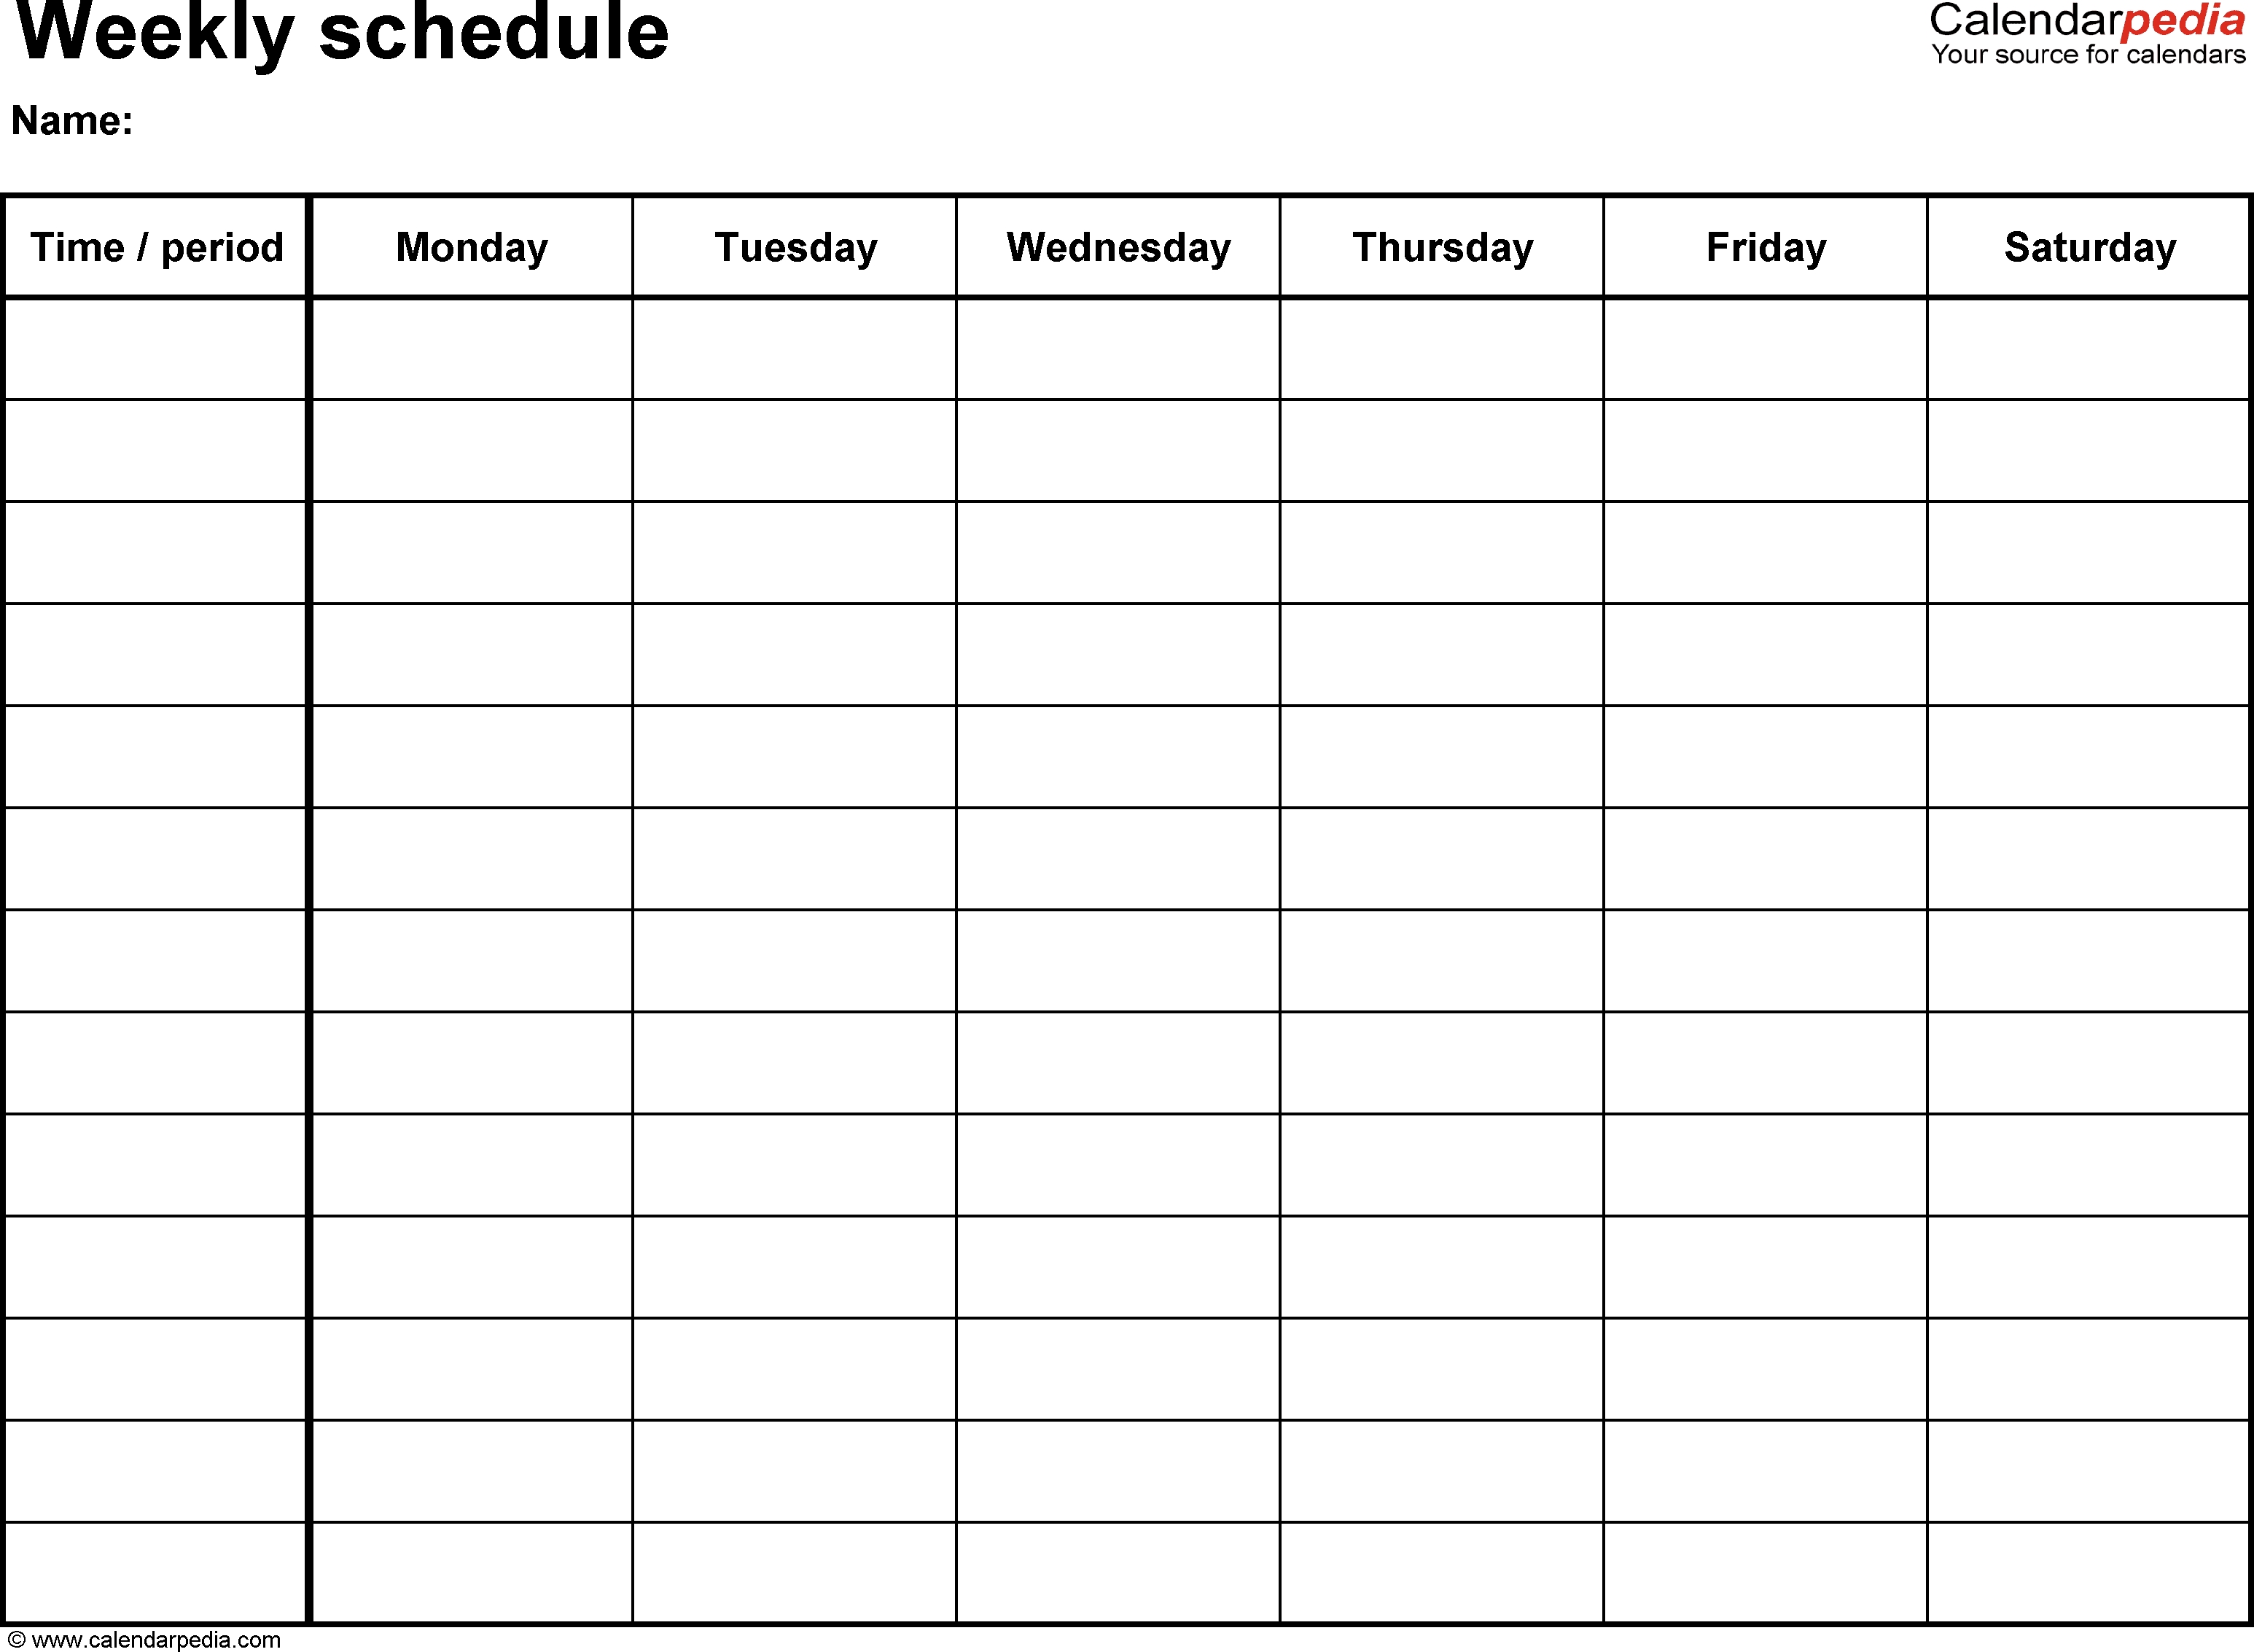 Free Weekly Schedule Templates For Word - 18 Templates intended for 7 Day Calendar Template Fillable